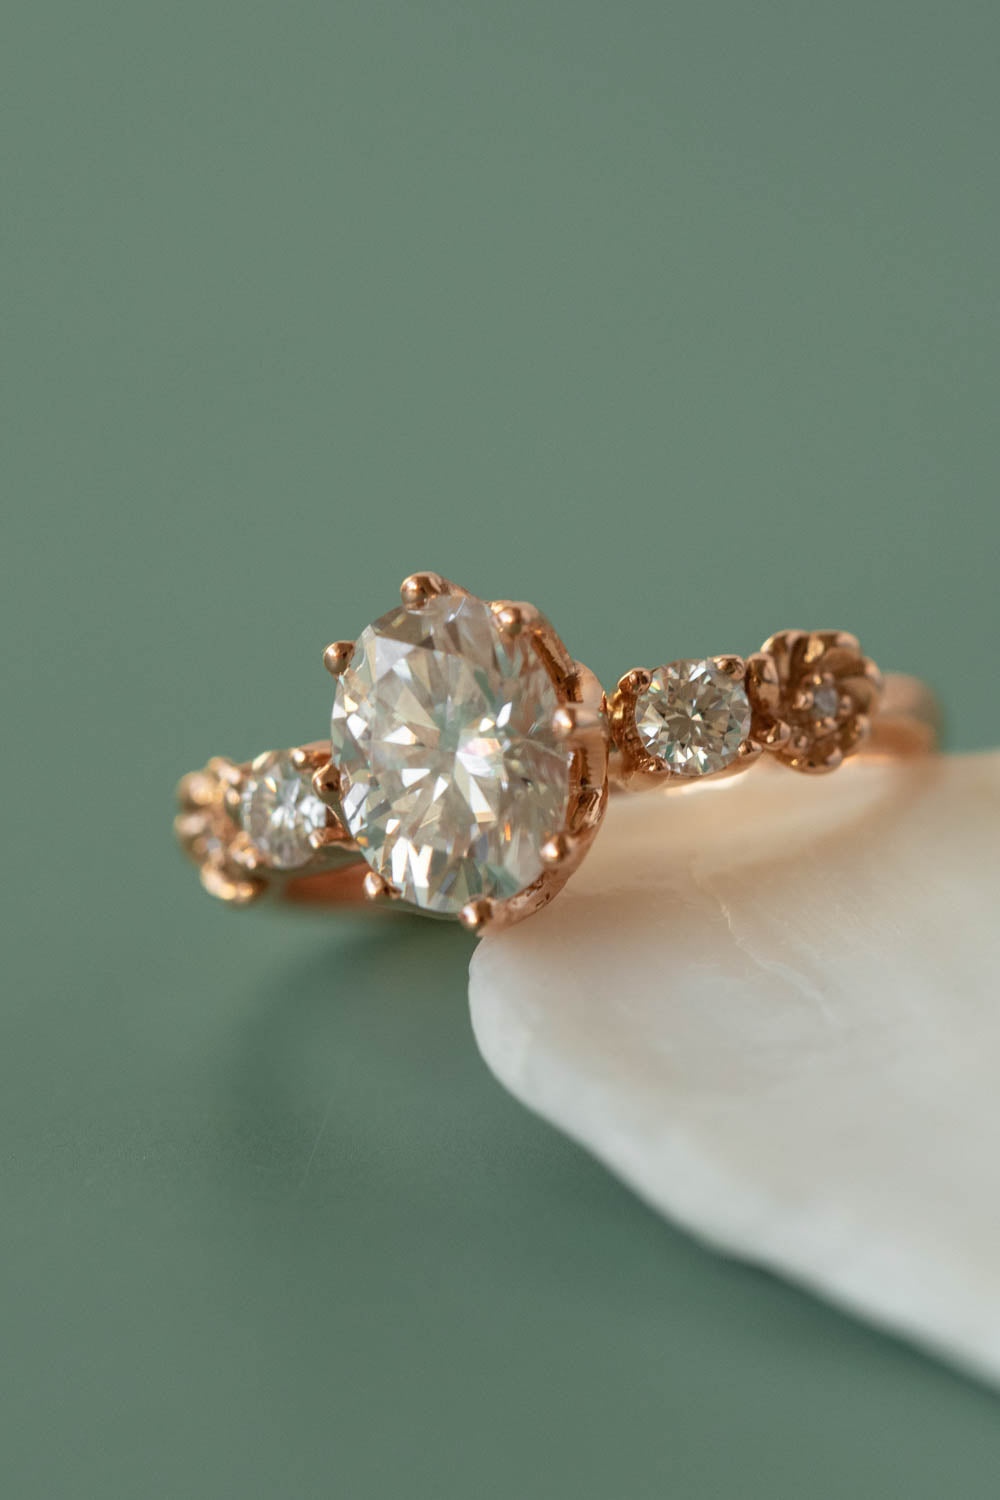 Ethical lab grown diamond engagement ring, rose gold flower promise ring with diamonds / Fiorella - Eden Garden Jewelry™